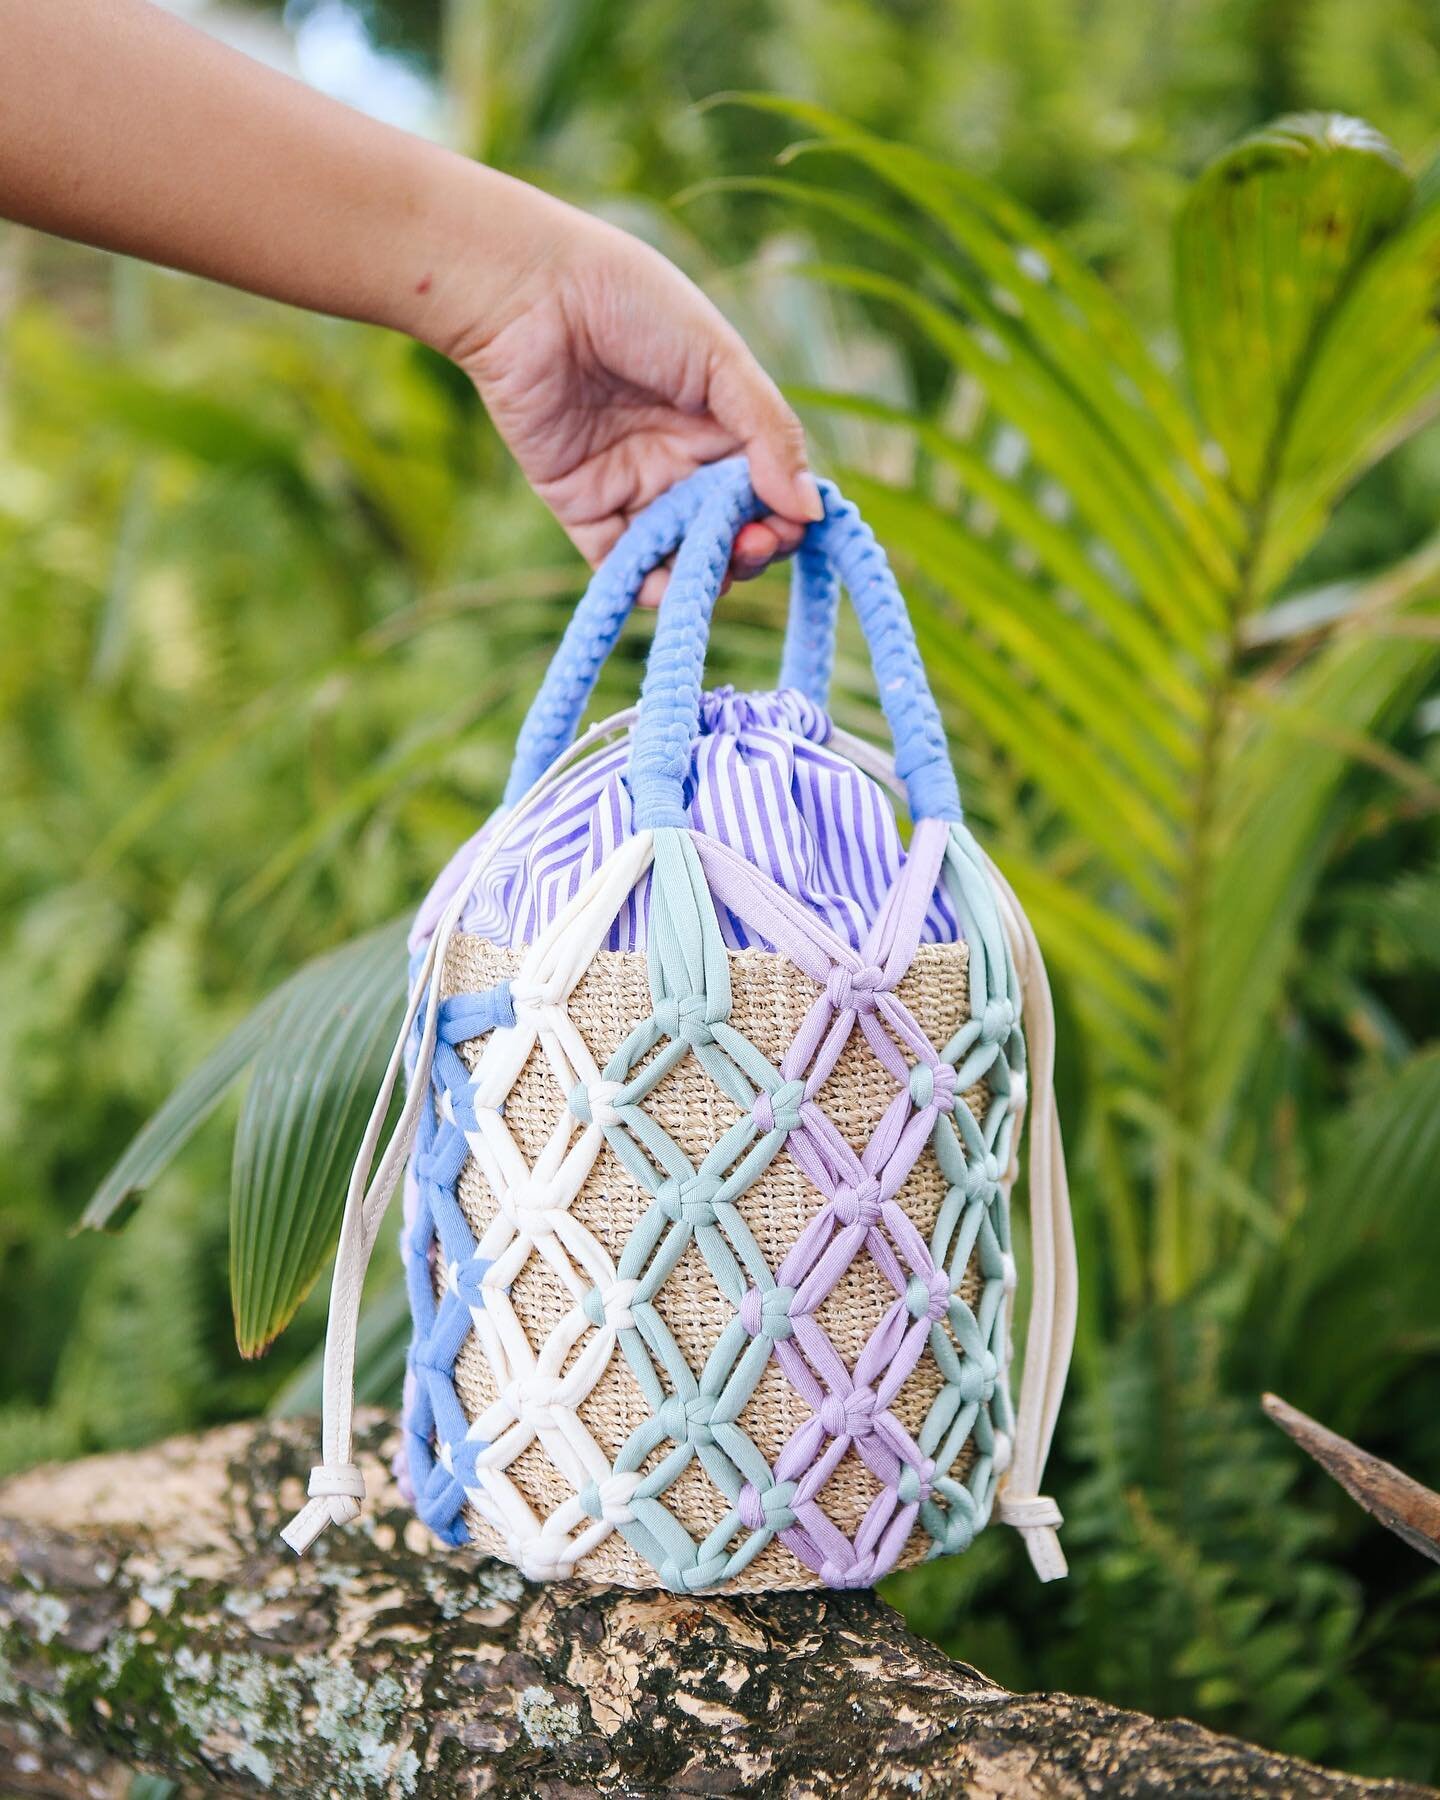 #canitellyou my #michellebucketbag in lilac and mint uses material from fabric overruns then macram&eacute;d by skilled artisans of @rags2richesinc in the Philippines. 
Isn&rsquo;t it just the perfect beach tote this season? 
Ph : @anjangeles / 💜💙?